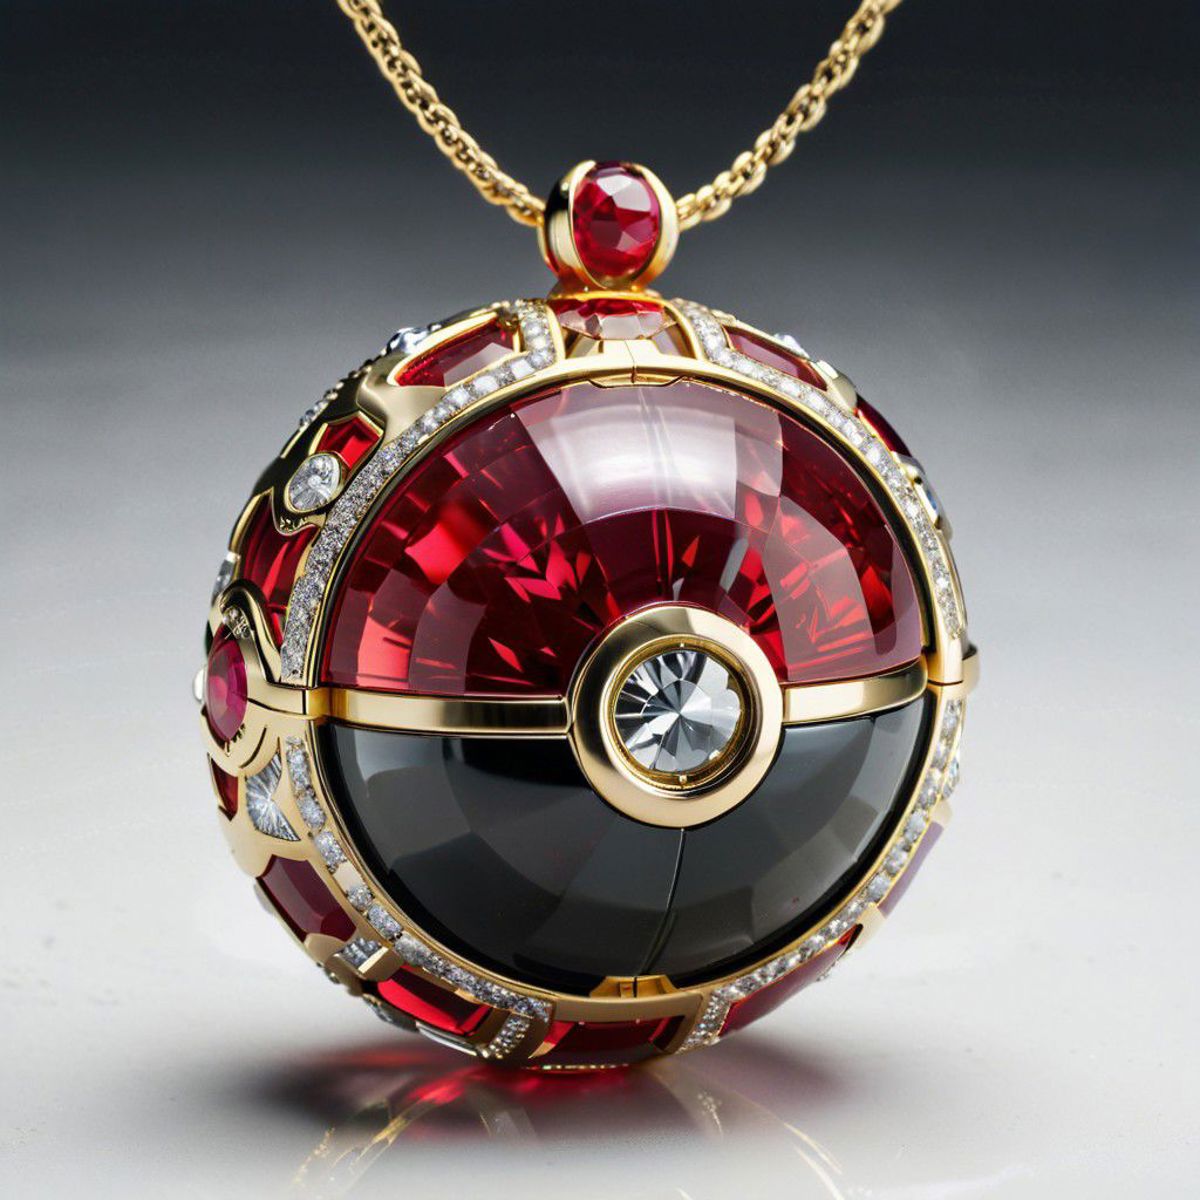 A red and gold Pokemon ball shaped pendant with a diamond in the center.